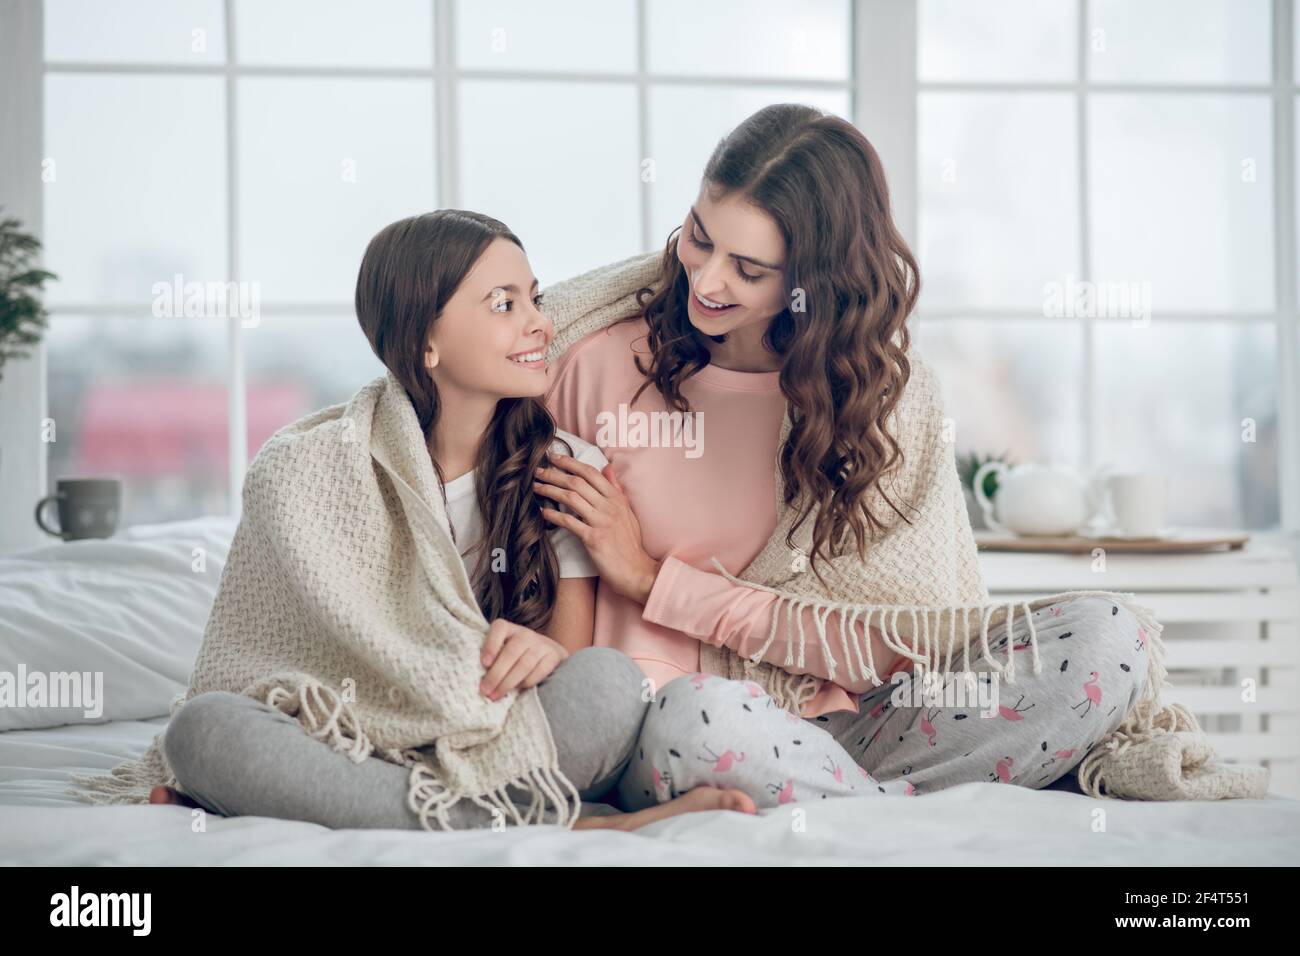 Mom and daughter sitting under blanket on bed Stock Photo